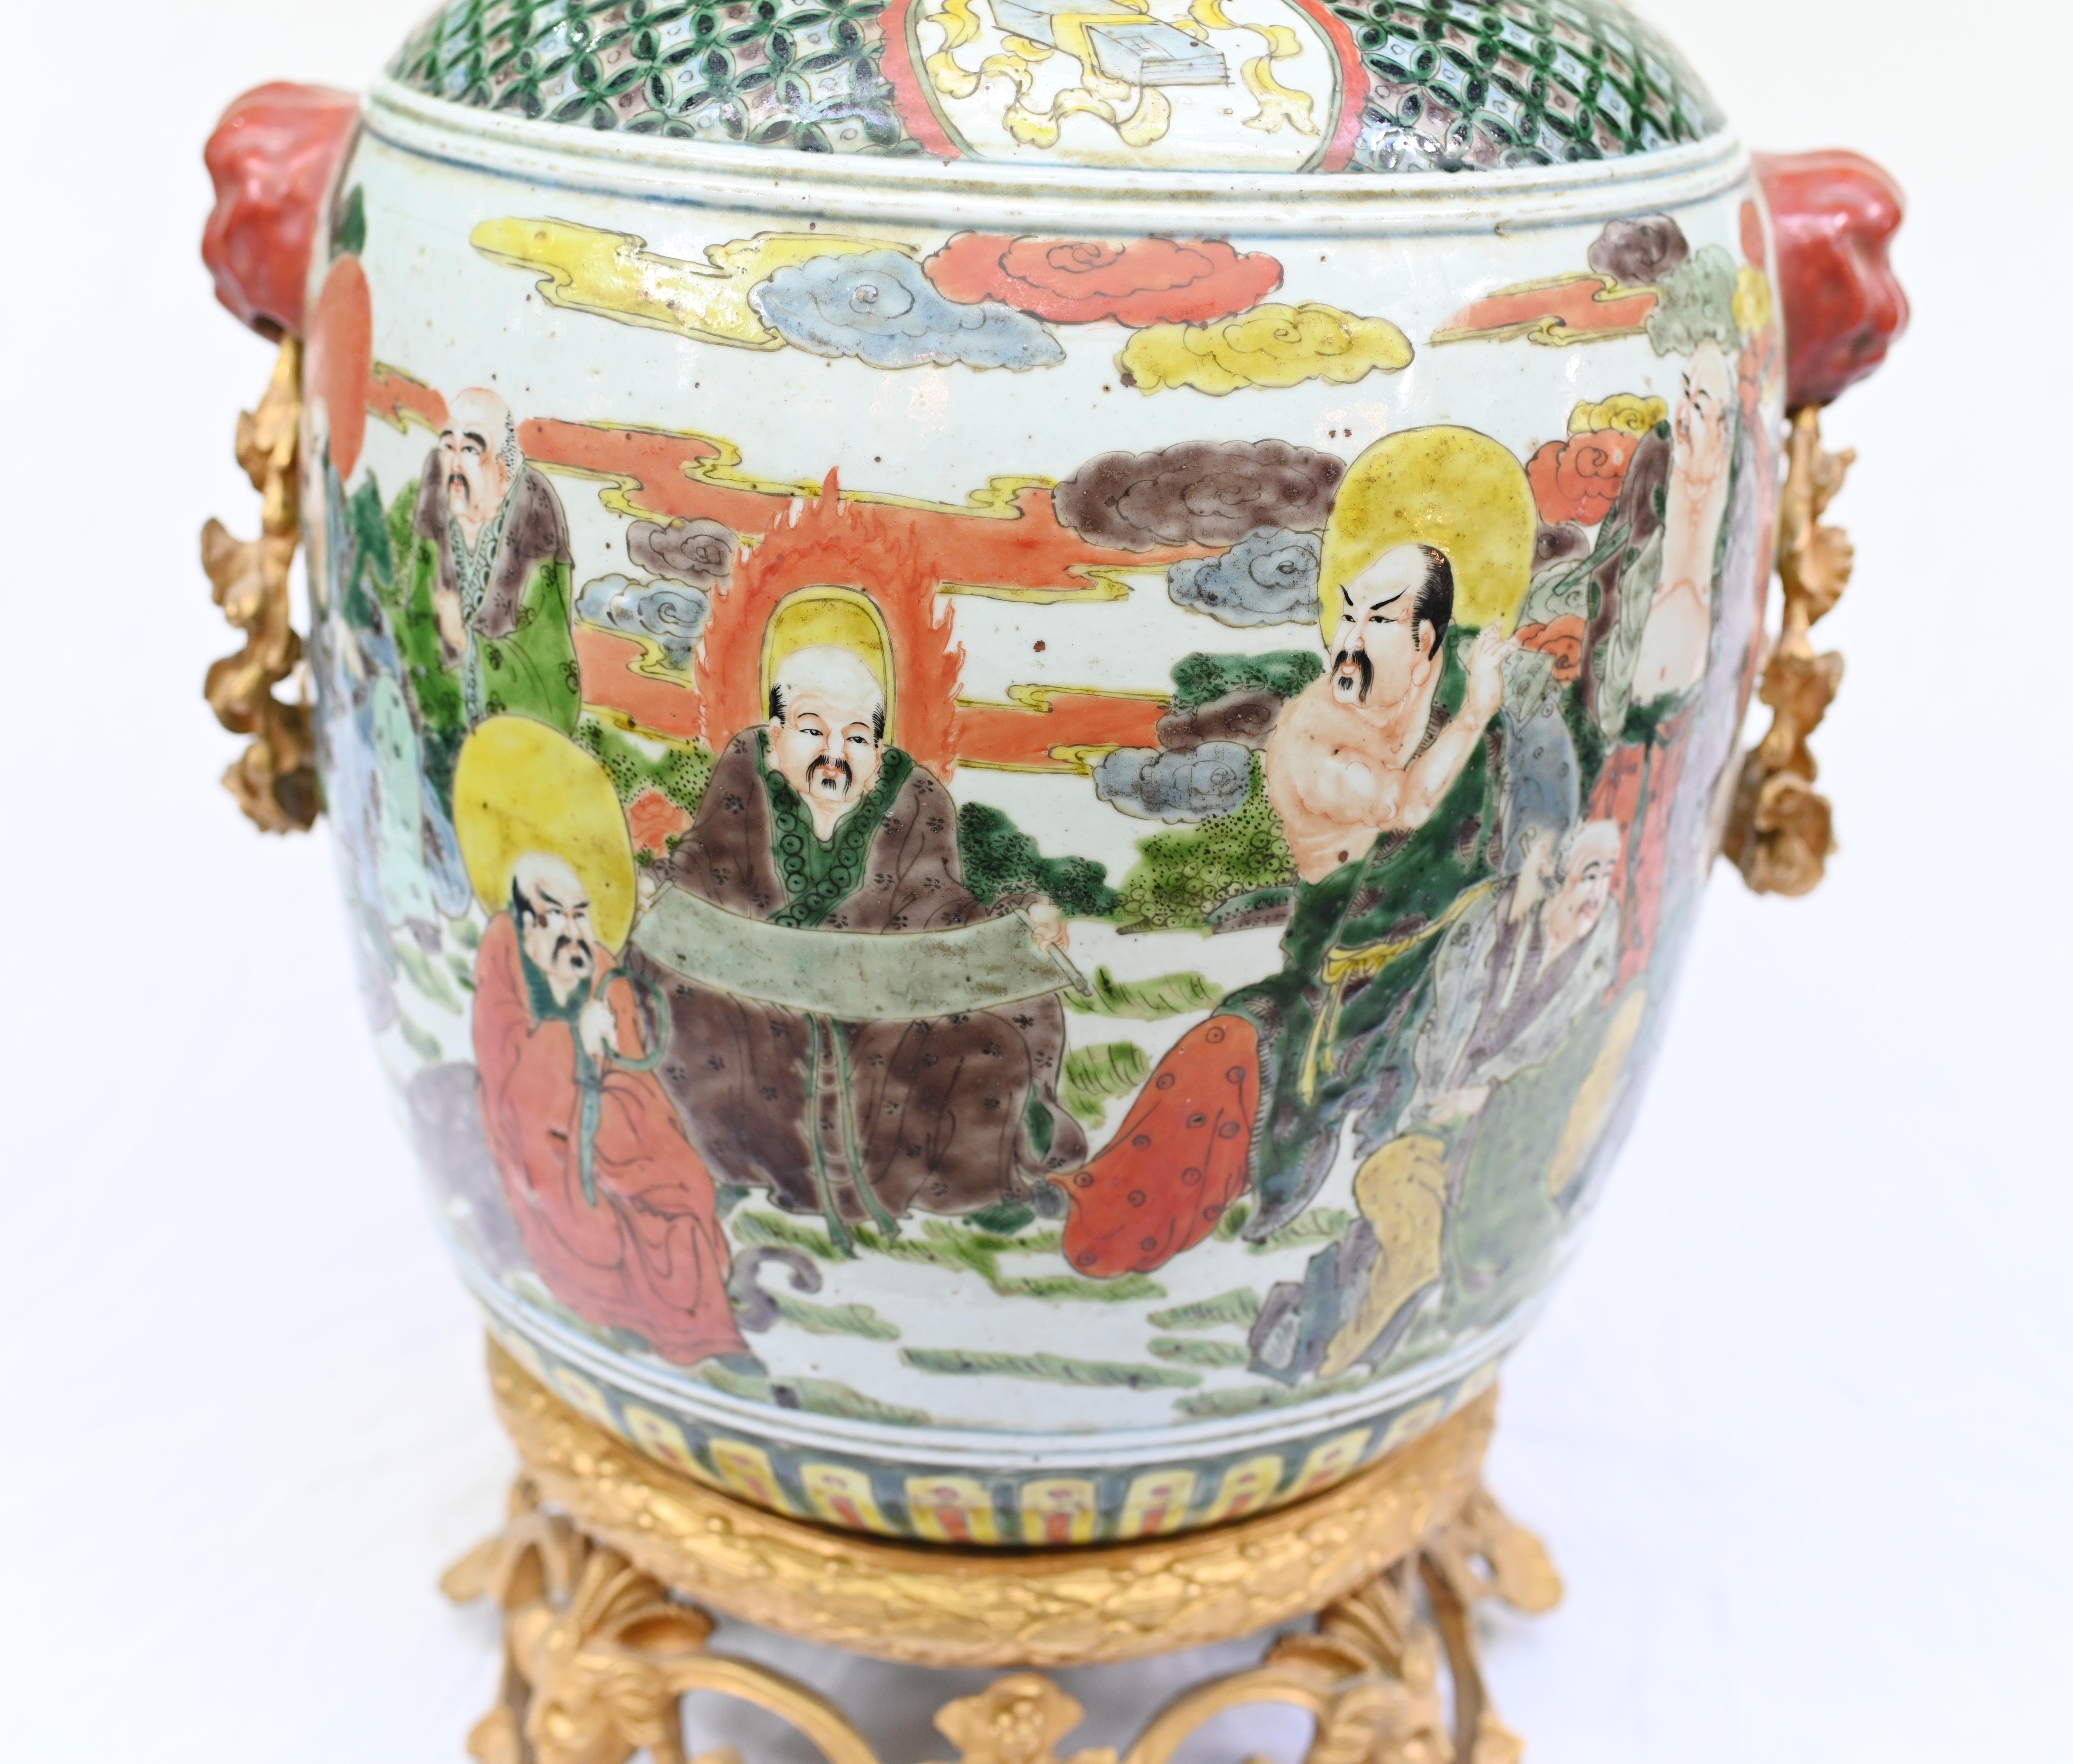 Characterful Chinese antique Qianlong urn with French gilt mounts
Porcelain features distinctive hand painted designs including
Chinese figures and motifs
We date this to circa 1910
It was common for these vases to be adapted for the French